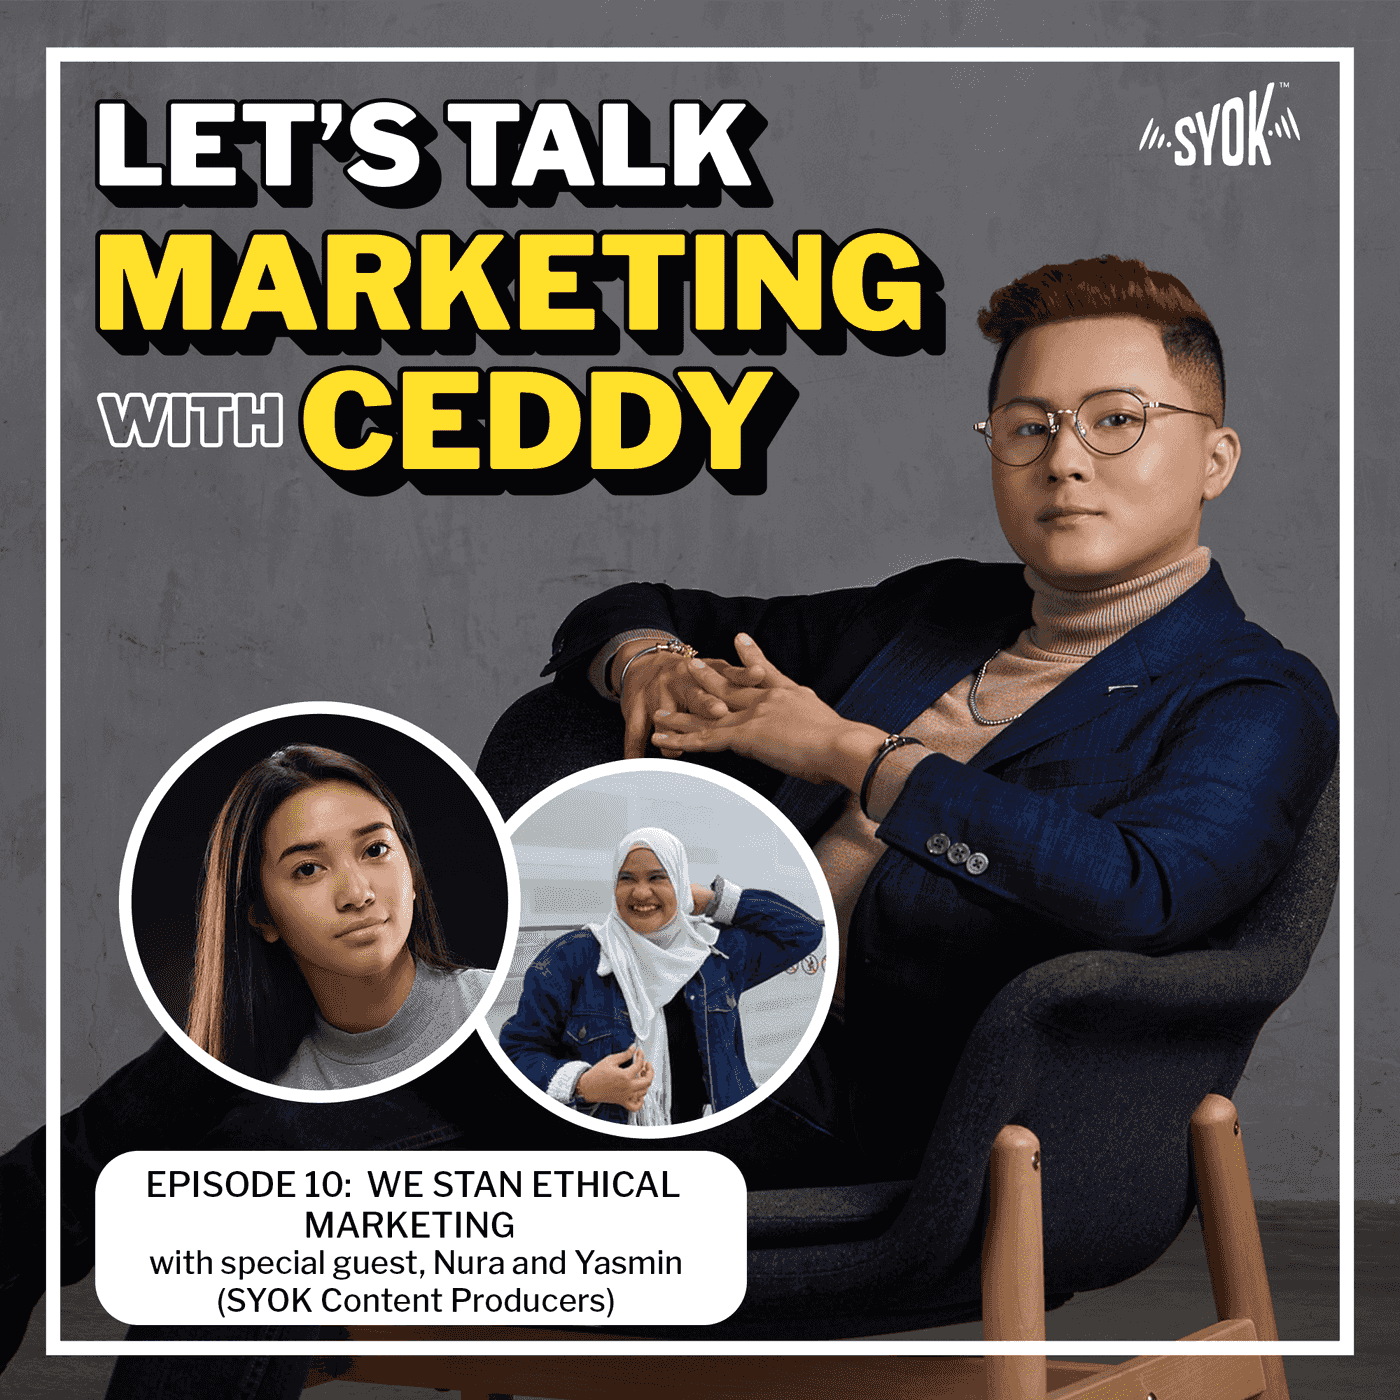 We Stan Ethical Marketing | Let's Talk Marketing with Ceddy EP10